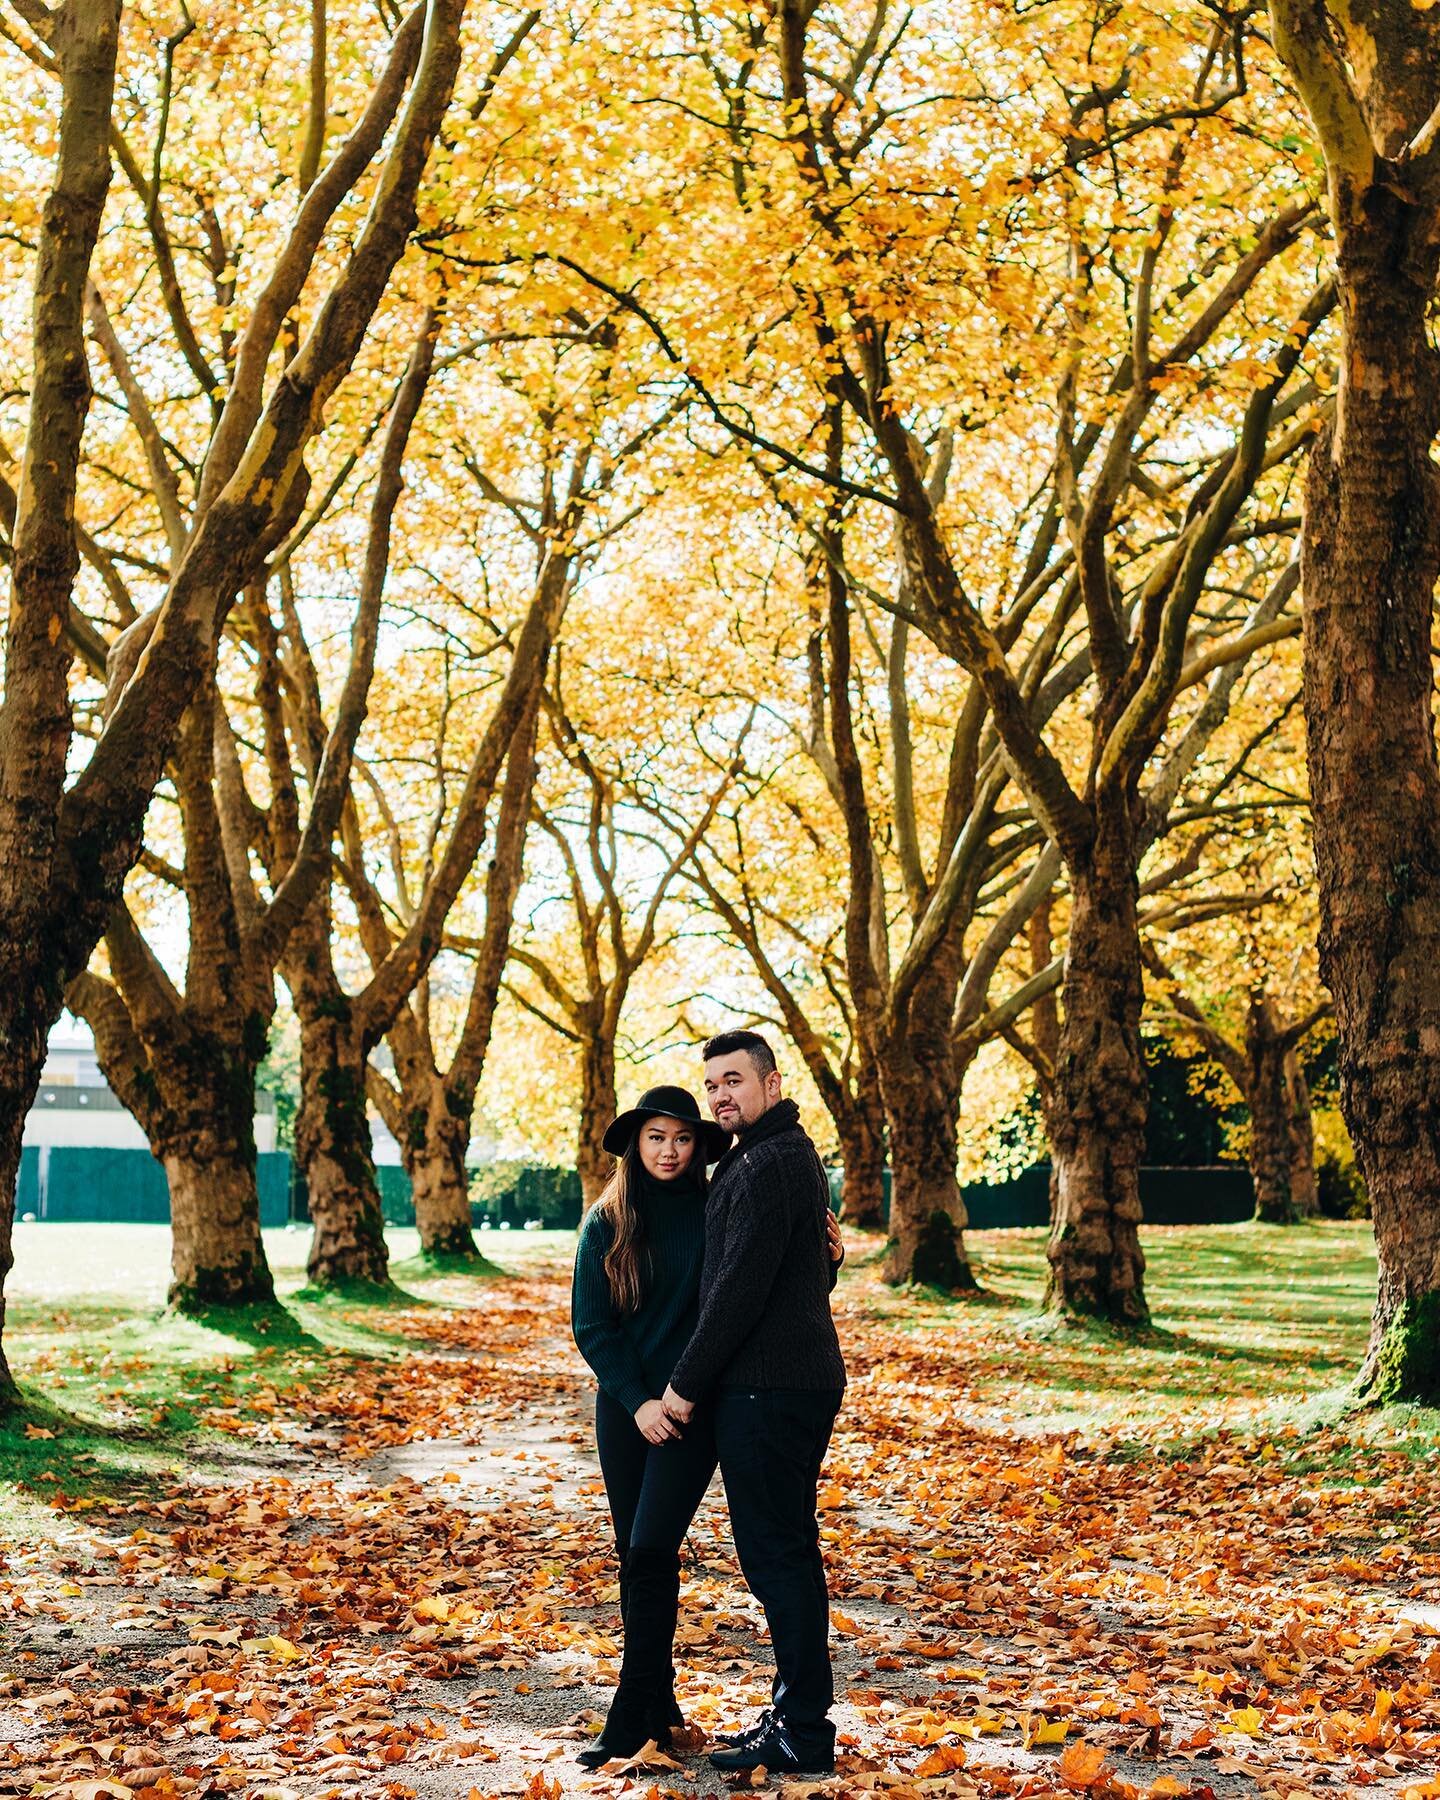 Beautiful fall colours🍂🍁 
Happy thanksgiving to all my friends 🧡

#fallengagementphotos #fall #engagementphotos #vancouverweddingphotography #vancouver #fallvibes #engagement #engaged #fallengagementsession